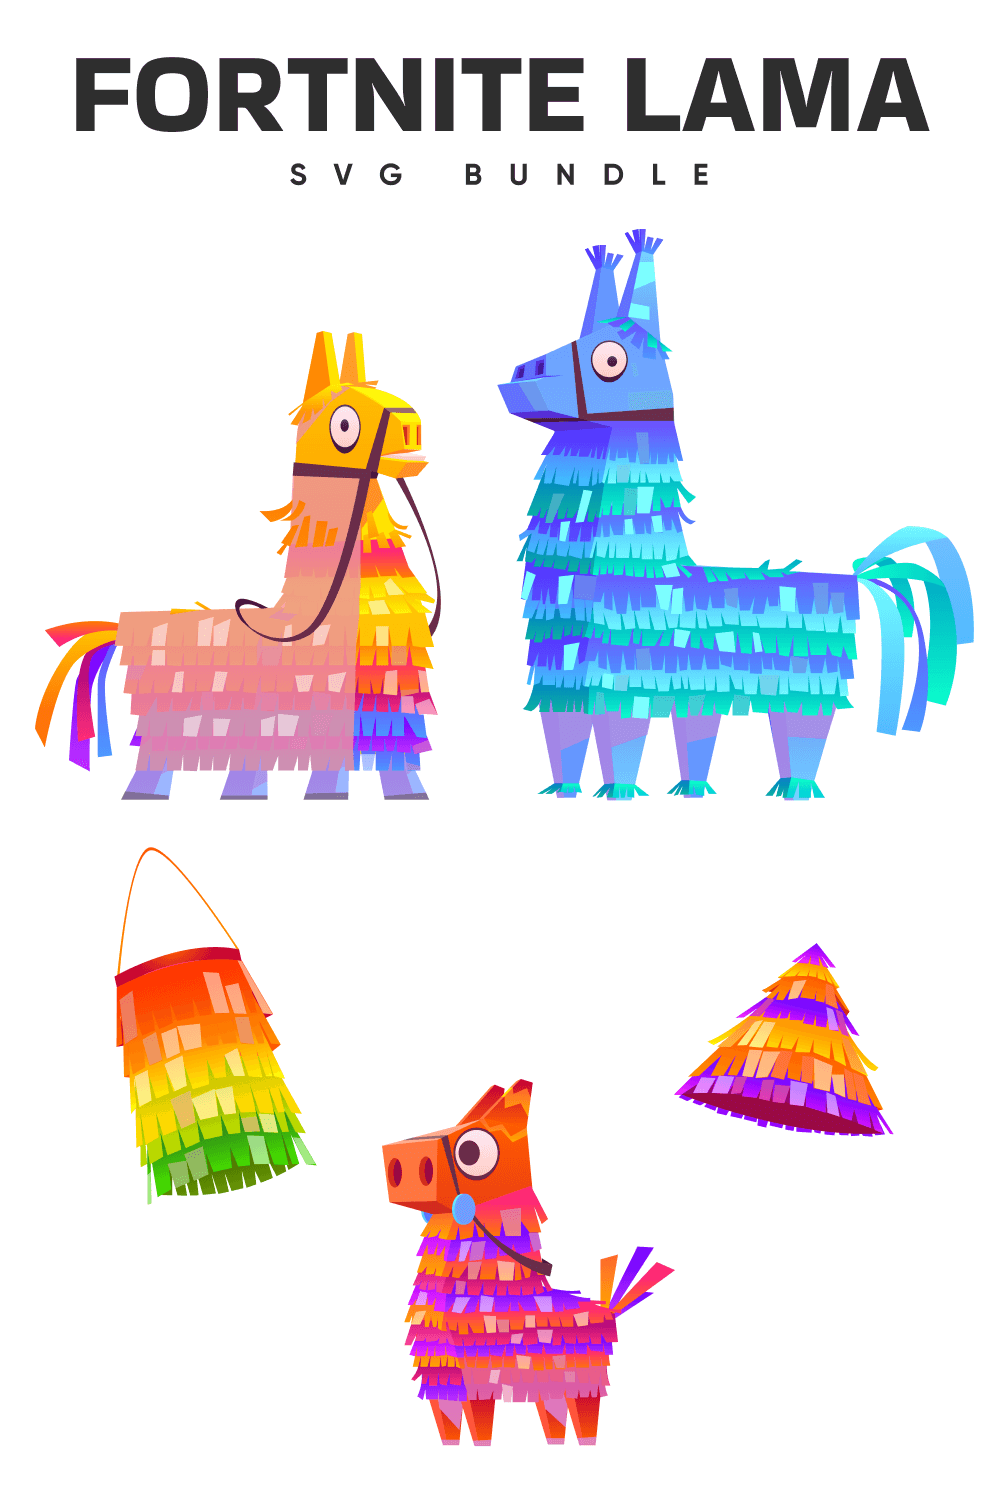 Group of colorful paper animals on a white background.